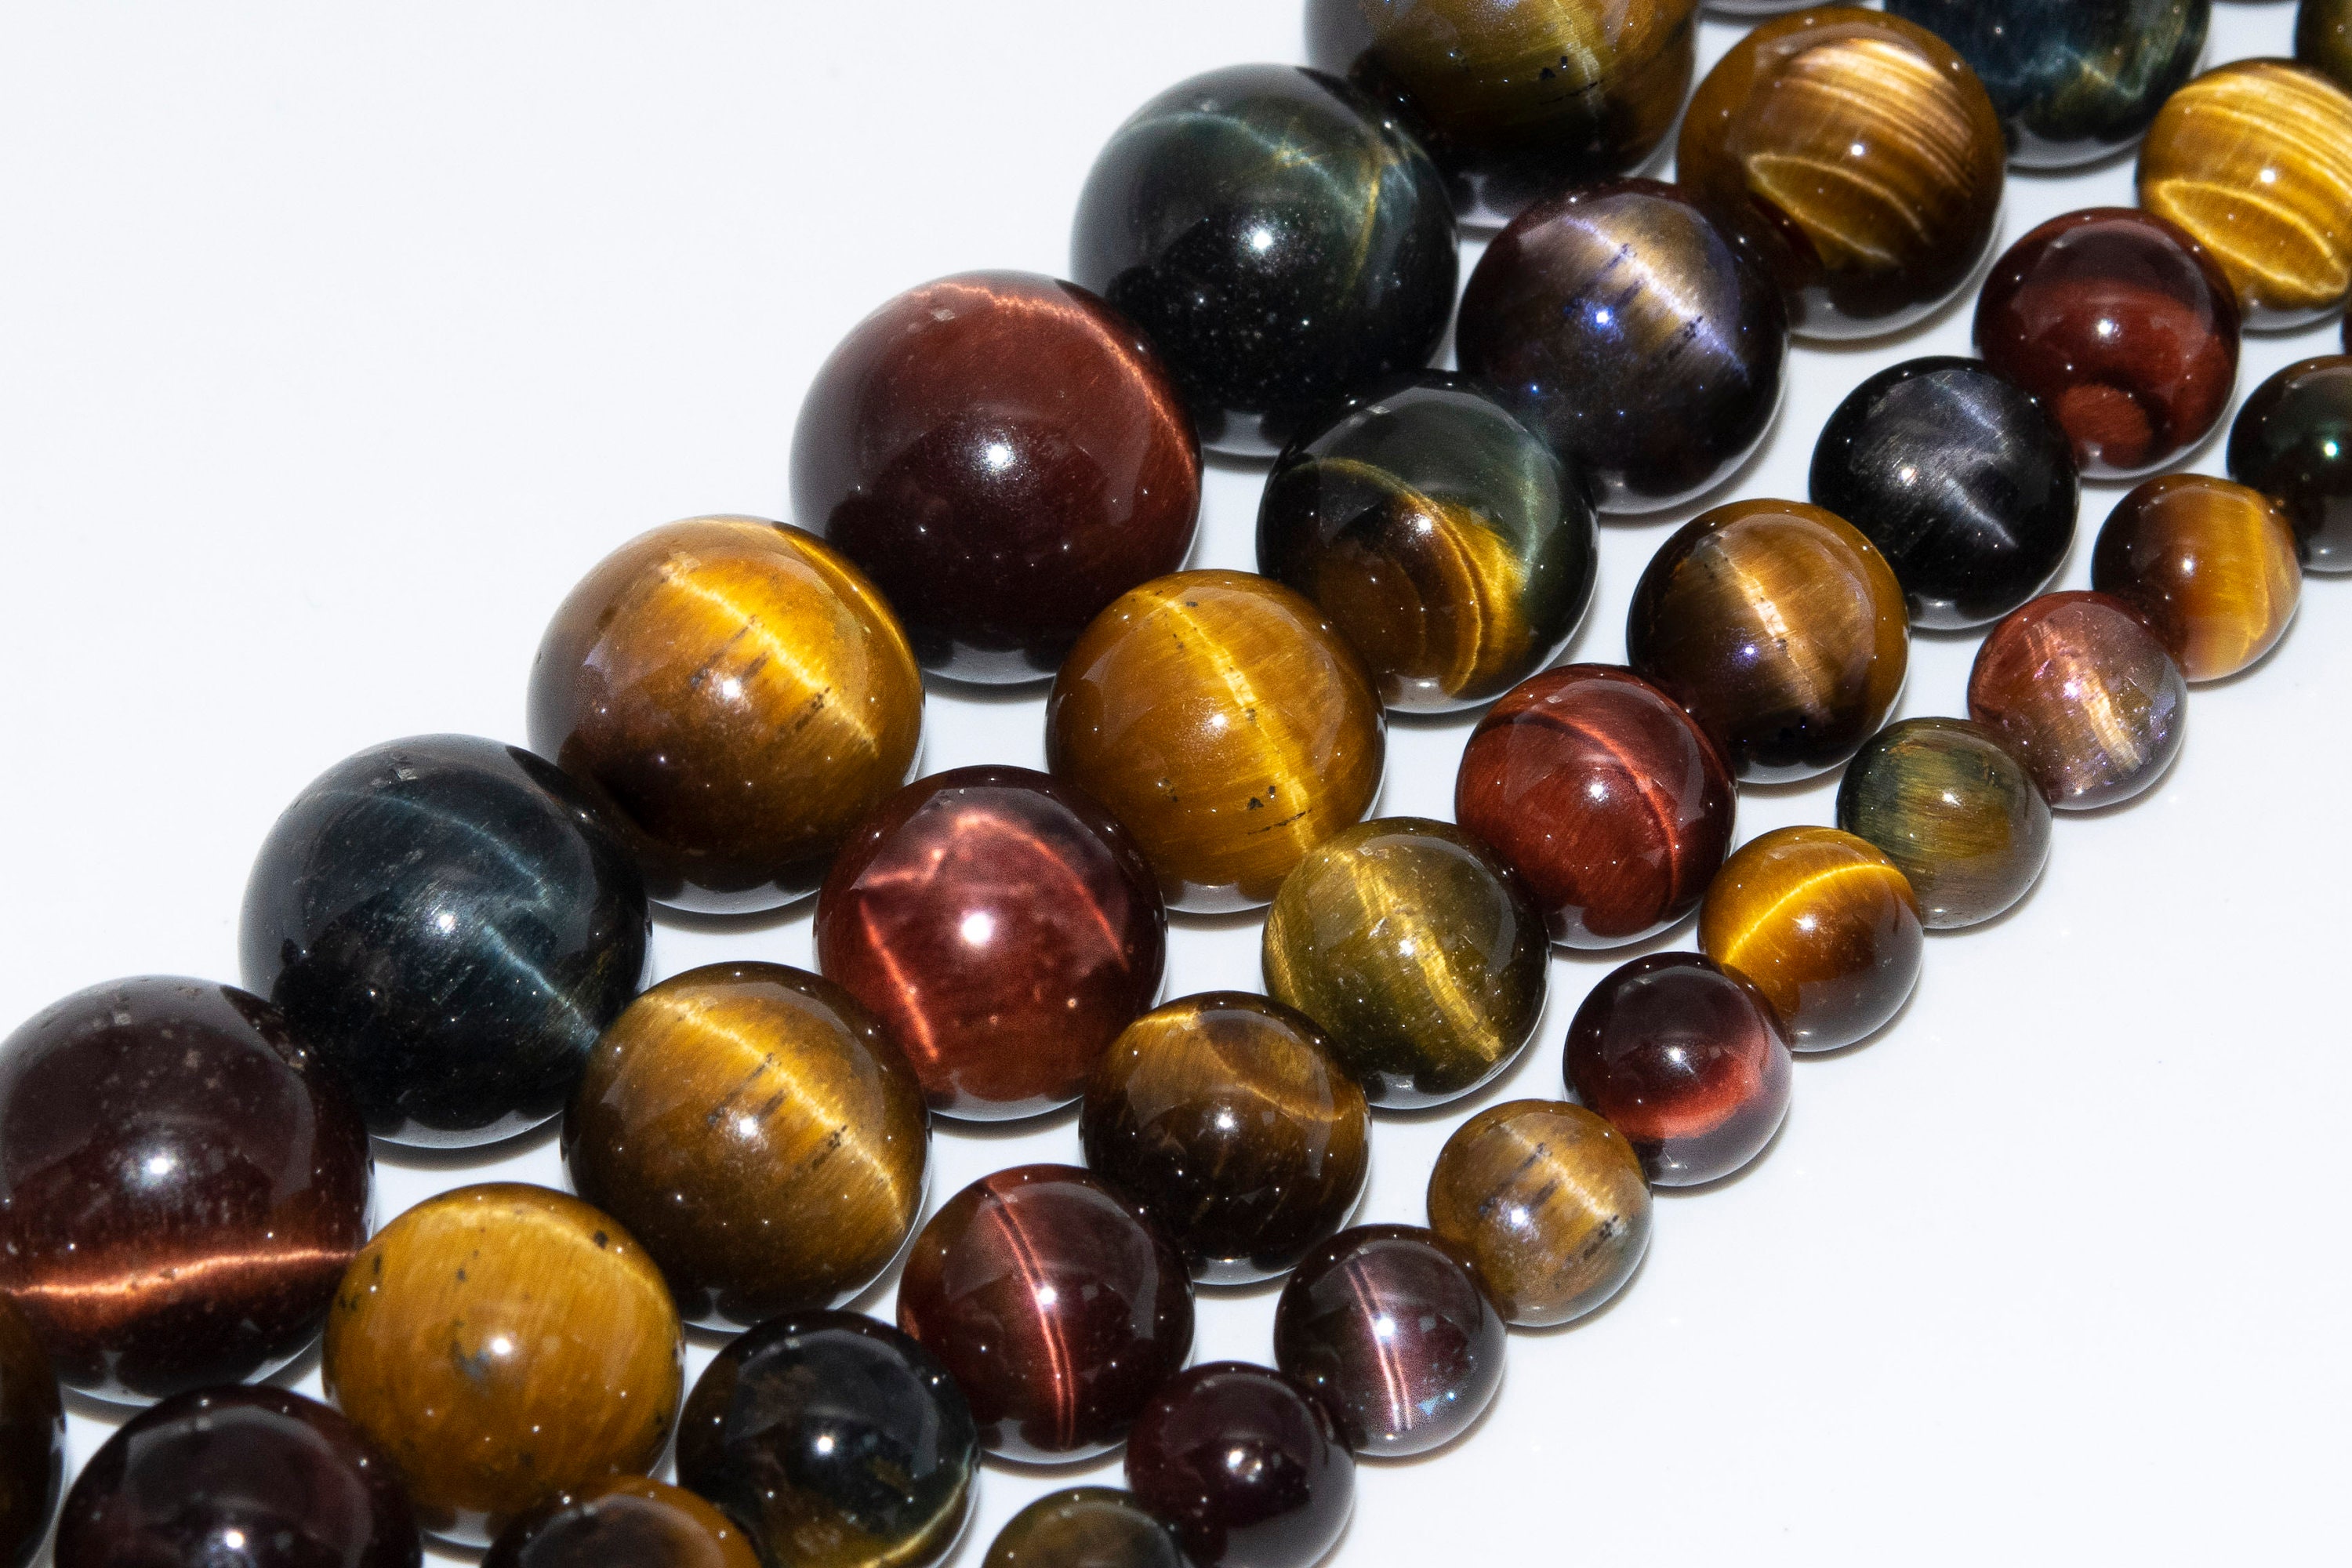 Natural 10mm African Roar Yellow Tigers Eye Stone Round Gems Loose Beads 15" 